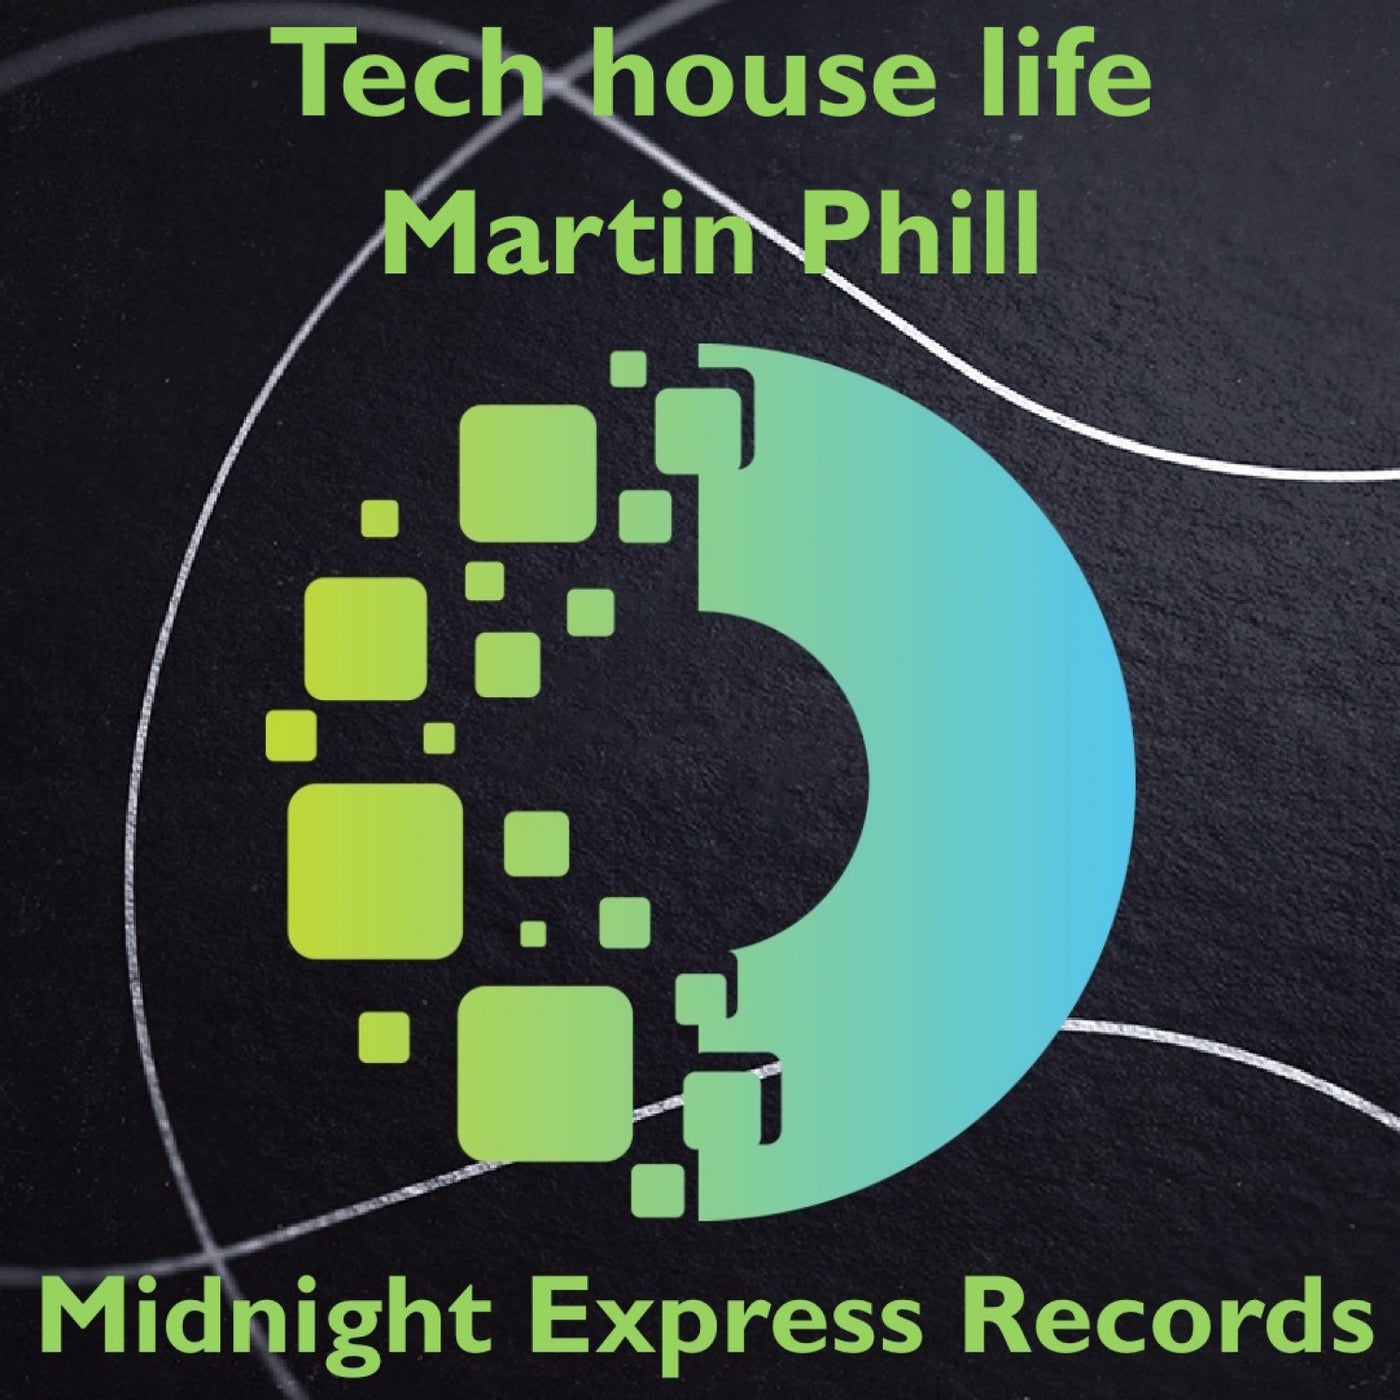 Tech house life by Marin Phill